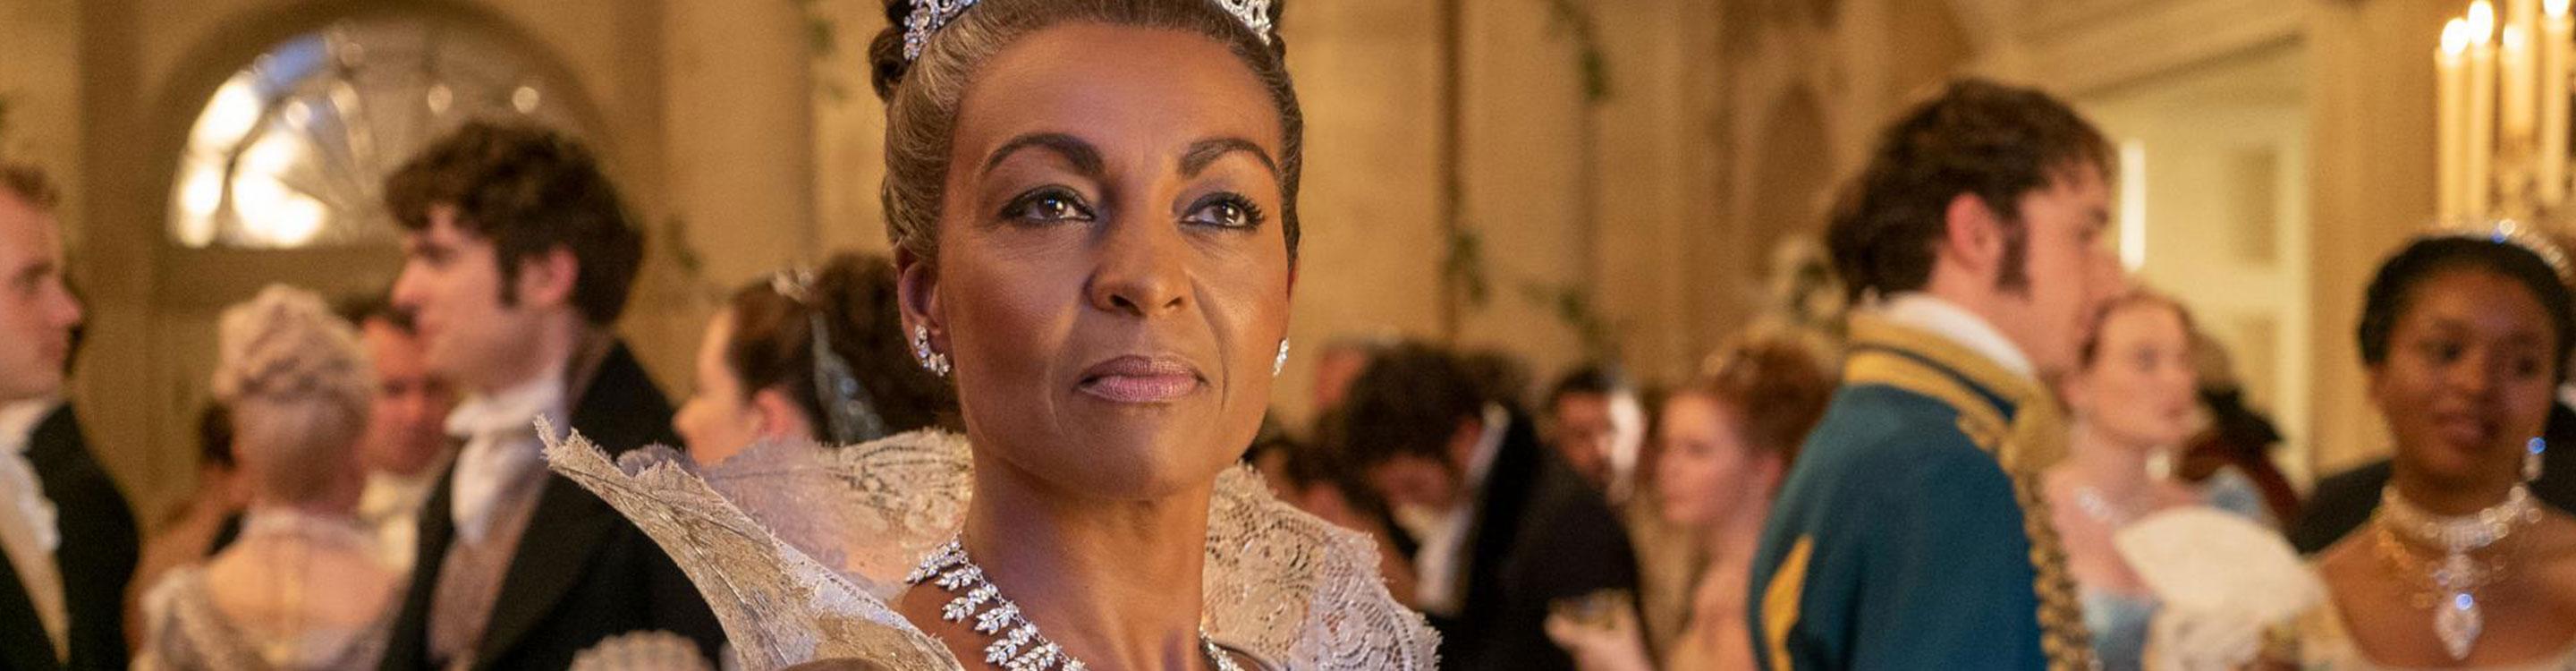 Adjoa Andoh performing as Lady Danbury in the Netflix series Bridgerton, seen here in a white ballgown and tiara, with guests in the background, filmed on location in Bath, Somerset, UK